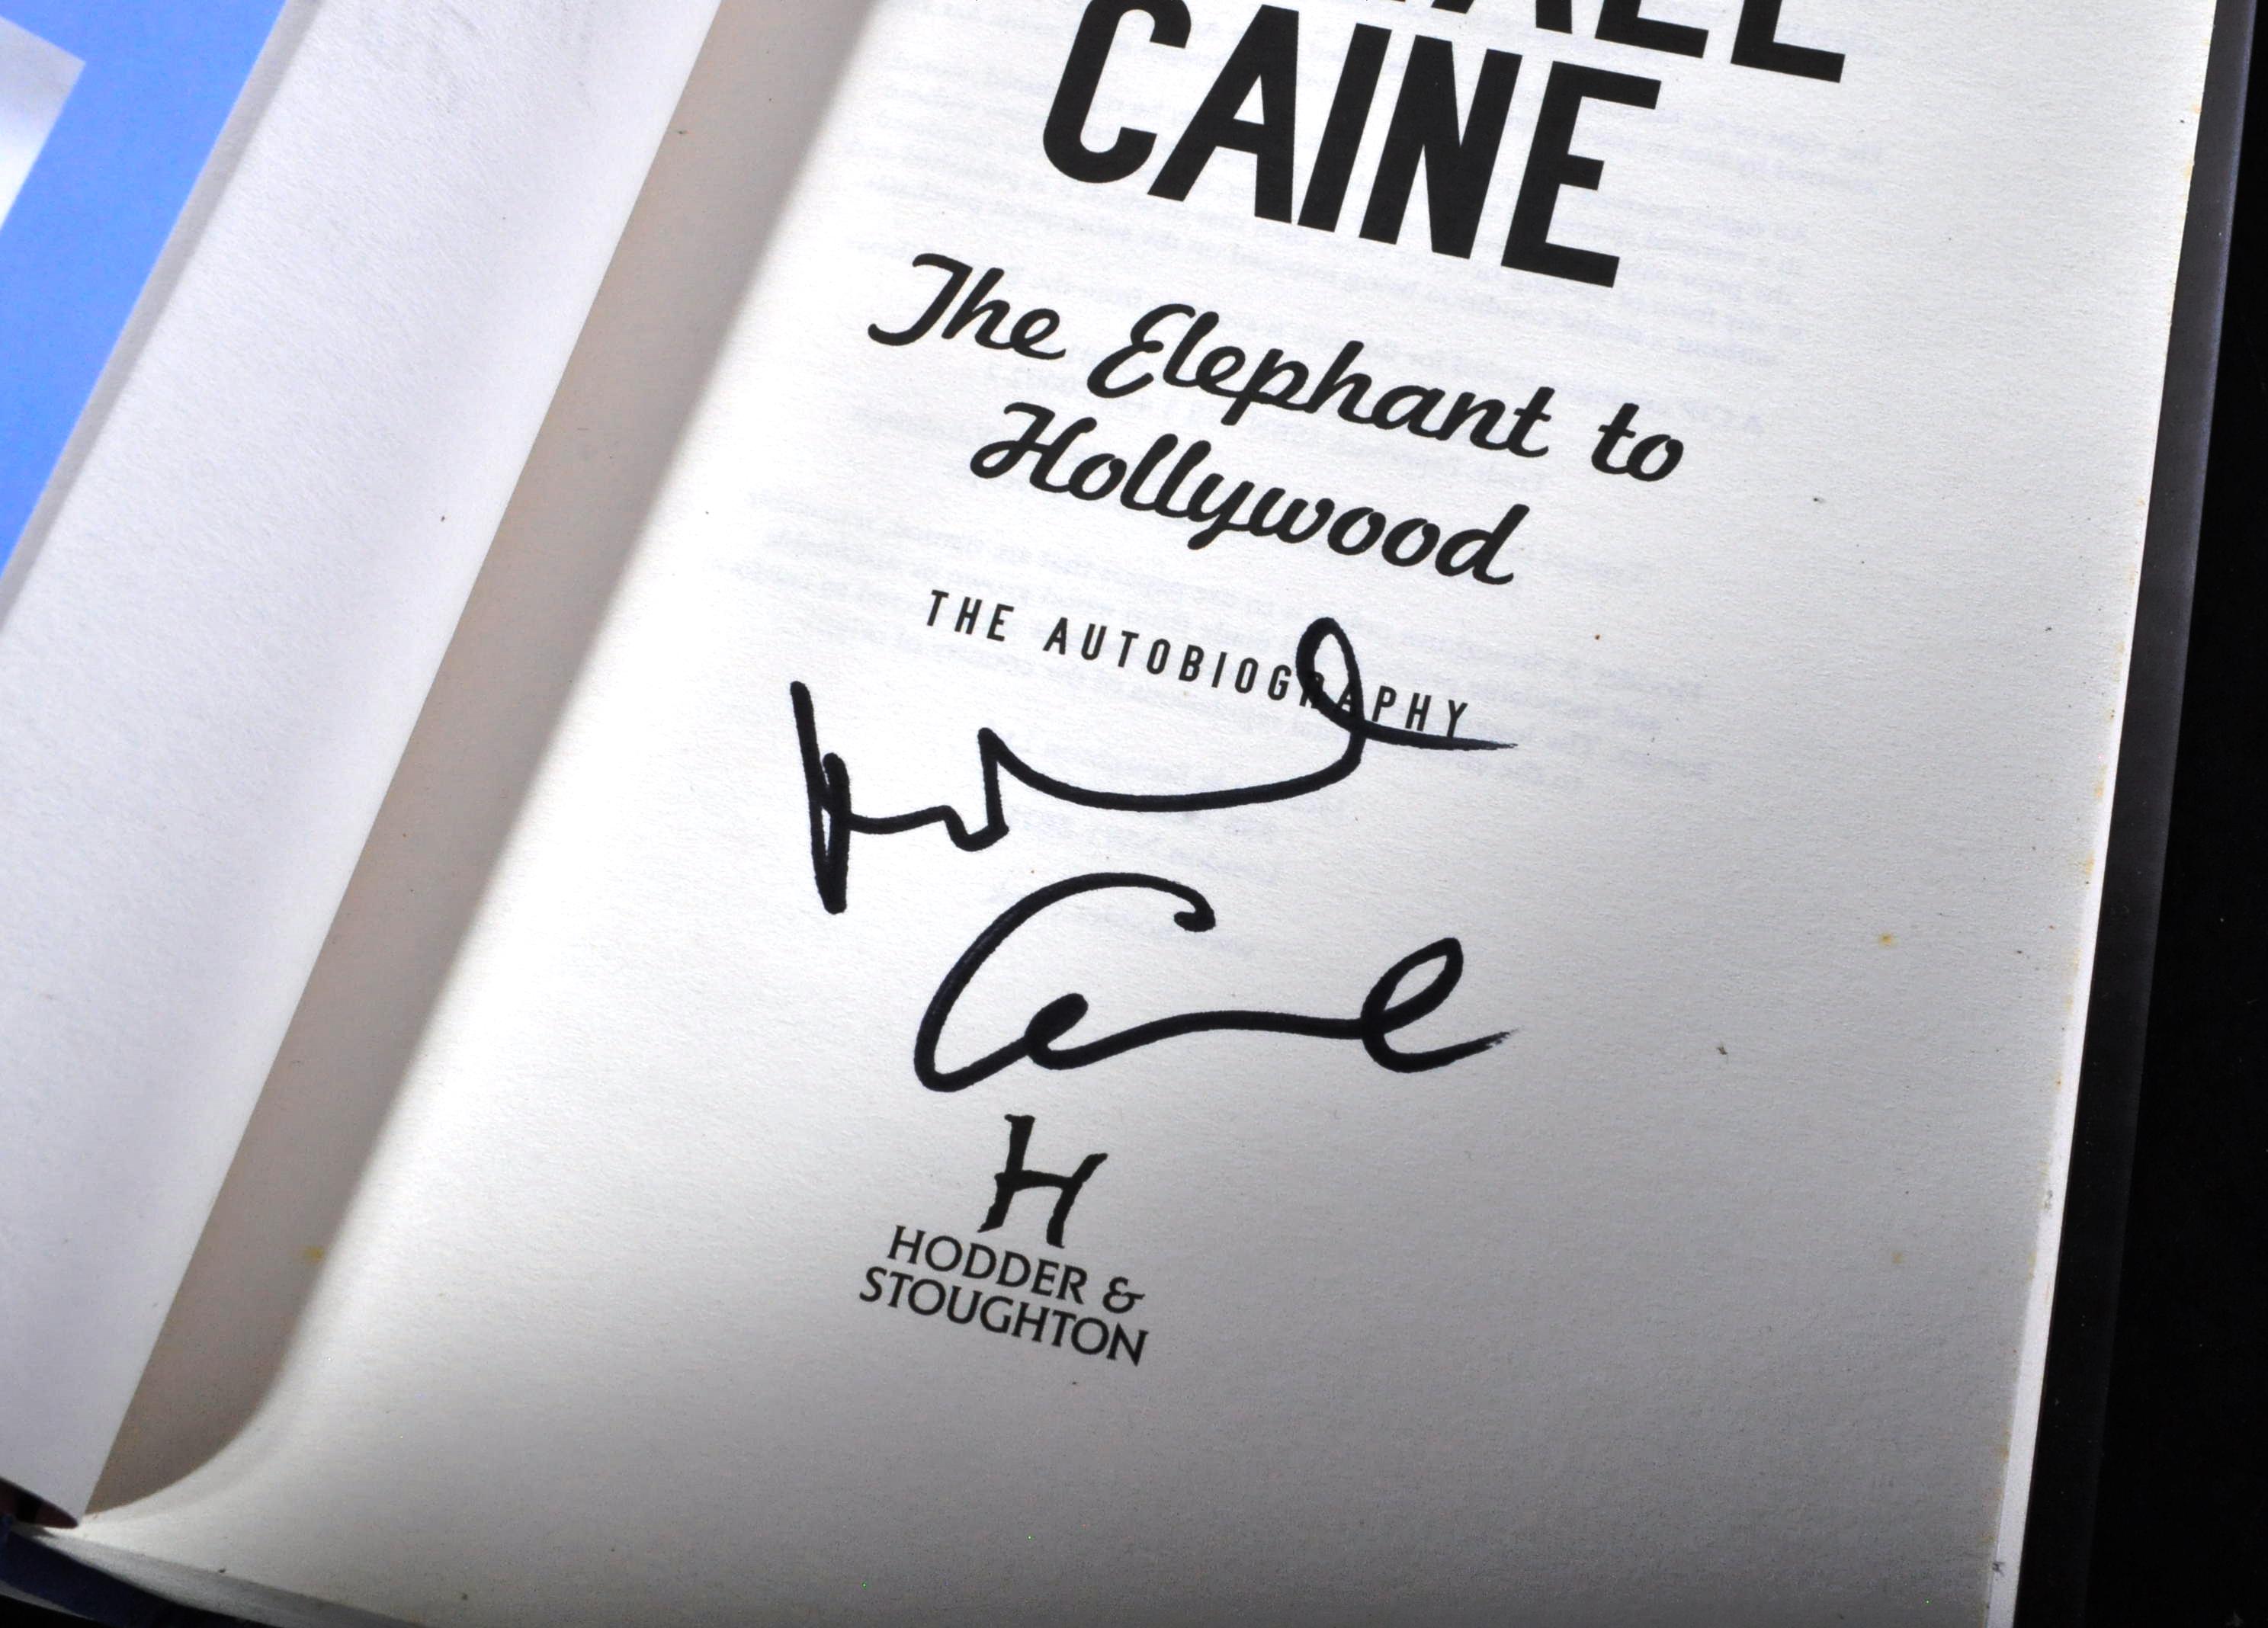 SIR MICHAEL CAINE - ELEPHANT TO HOLLYWOOD - SIGNED FIRST EDITION BOOK - Image 2 of 2